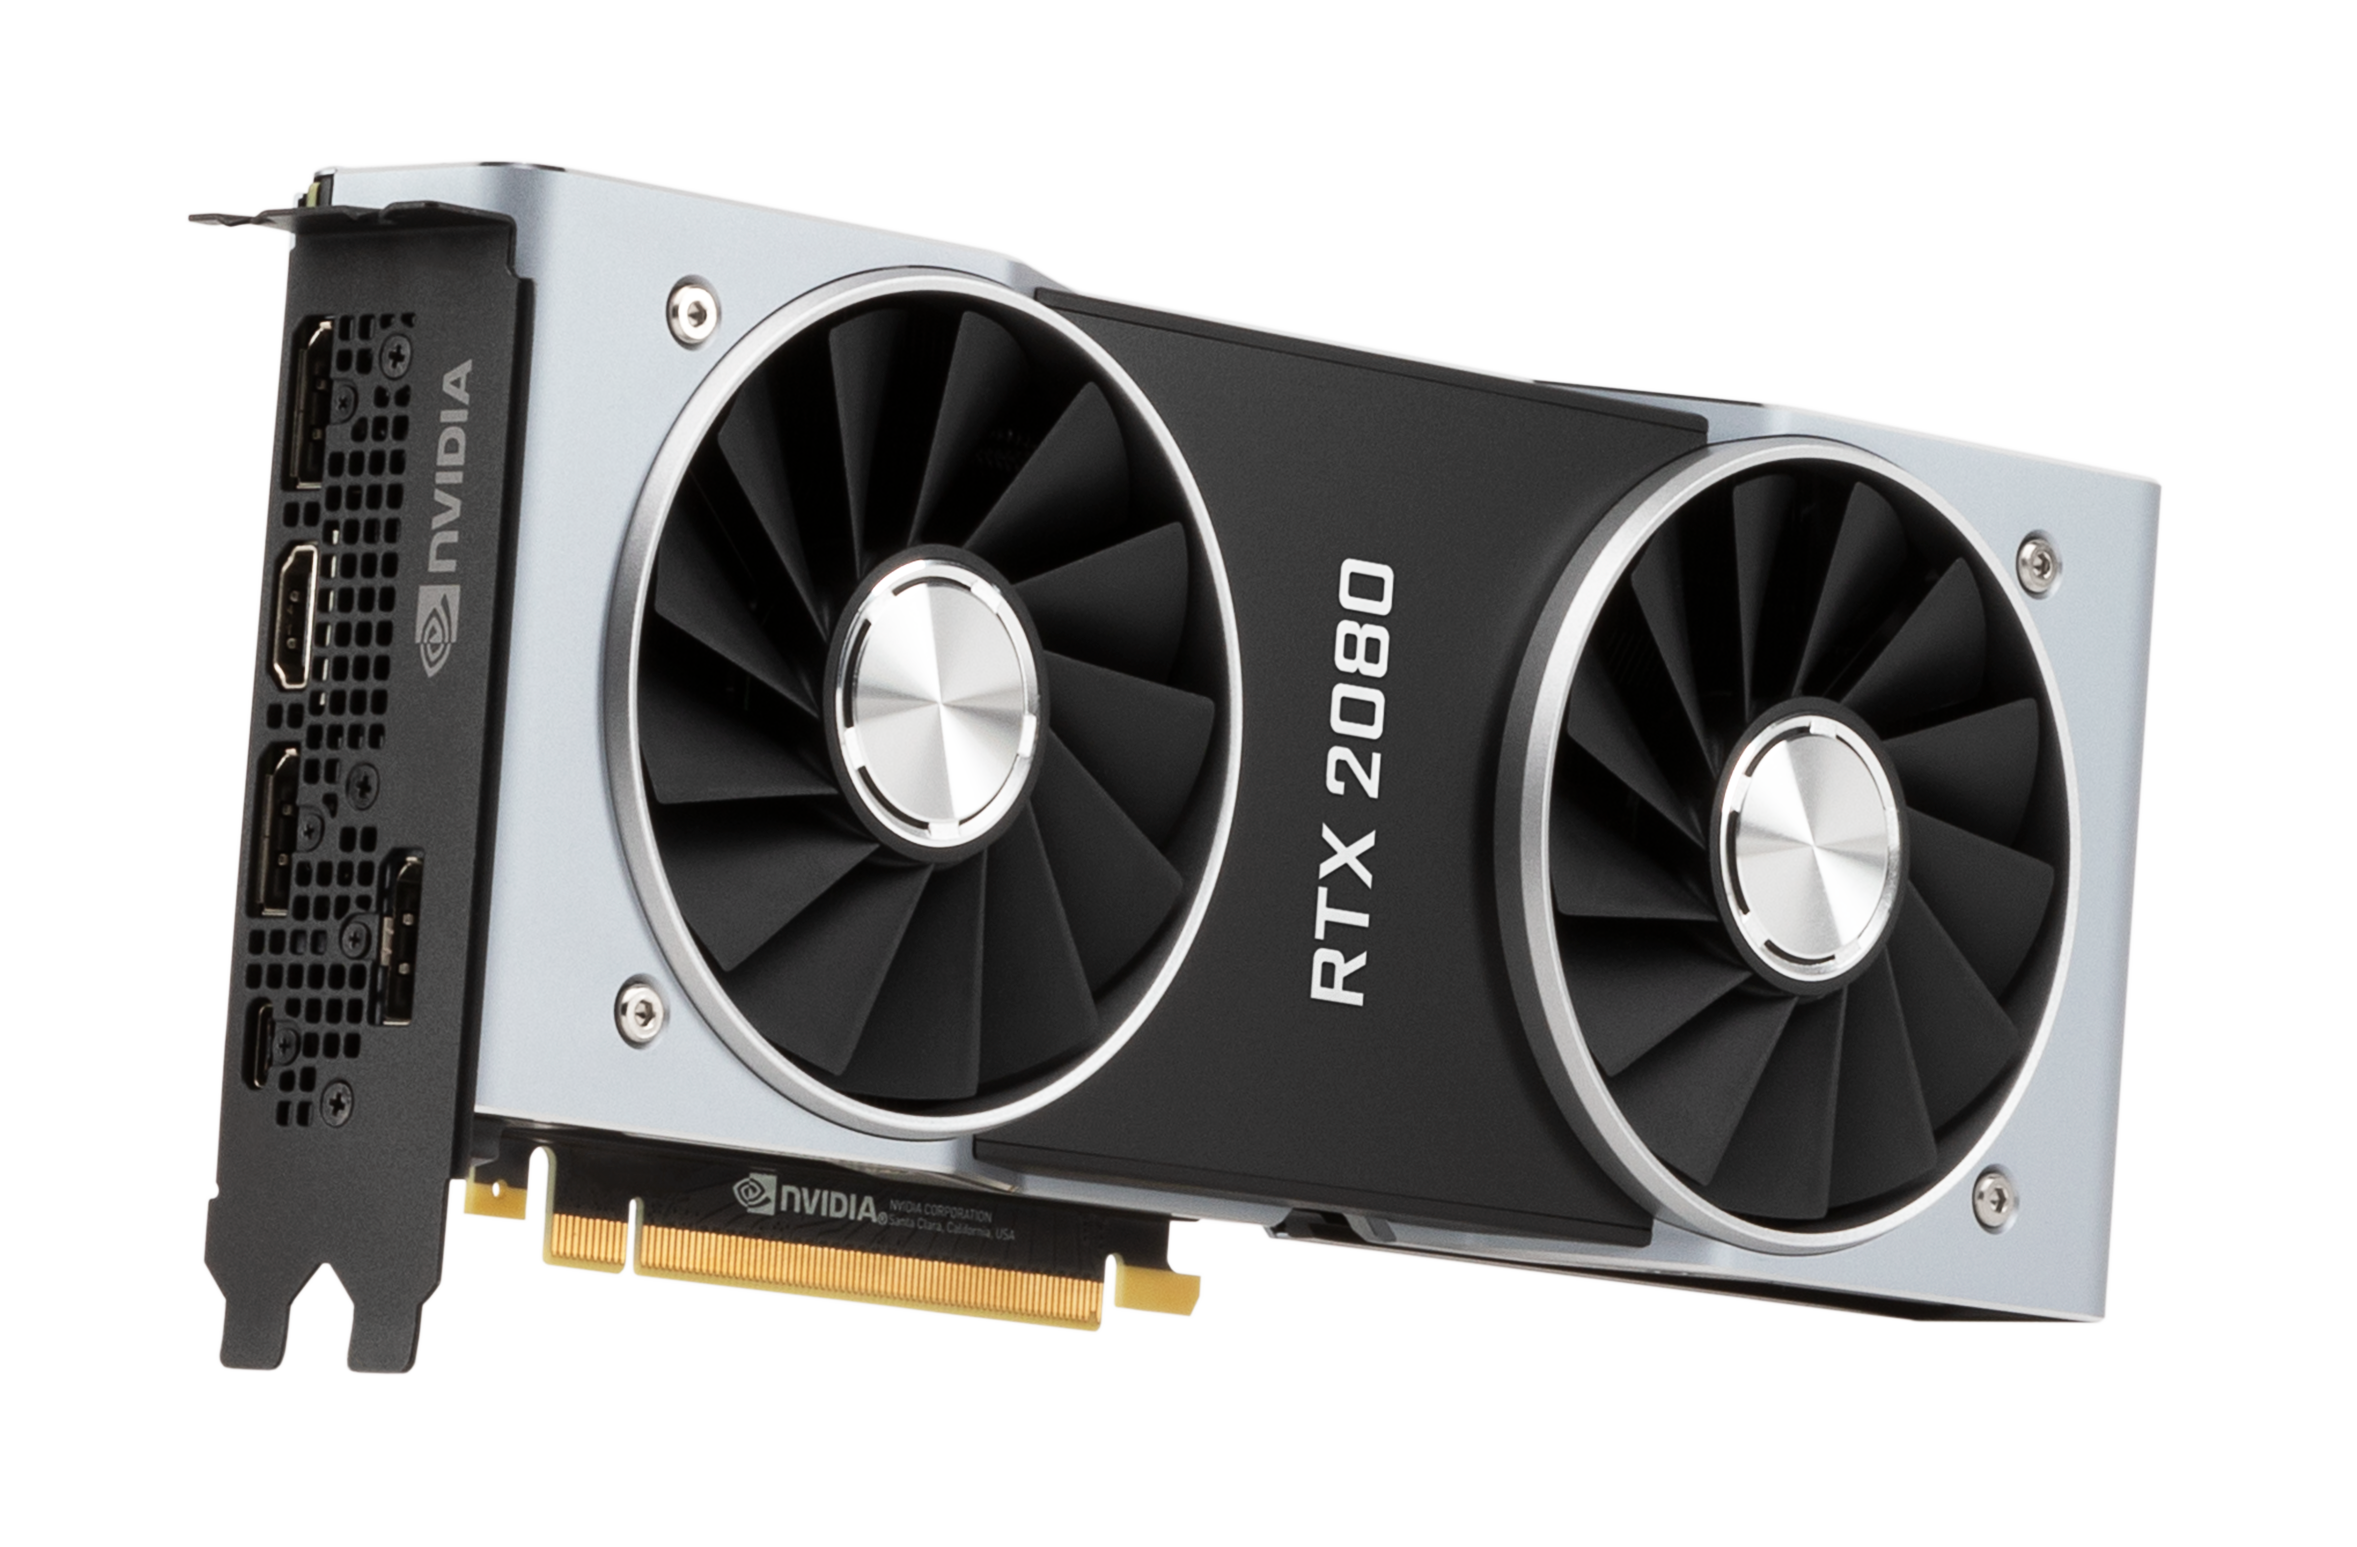 The Founders Edition RTX 2080 graphics card.